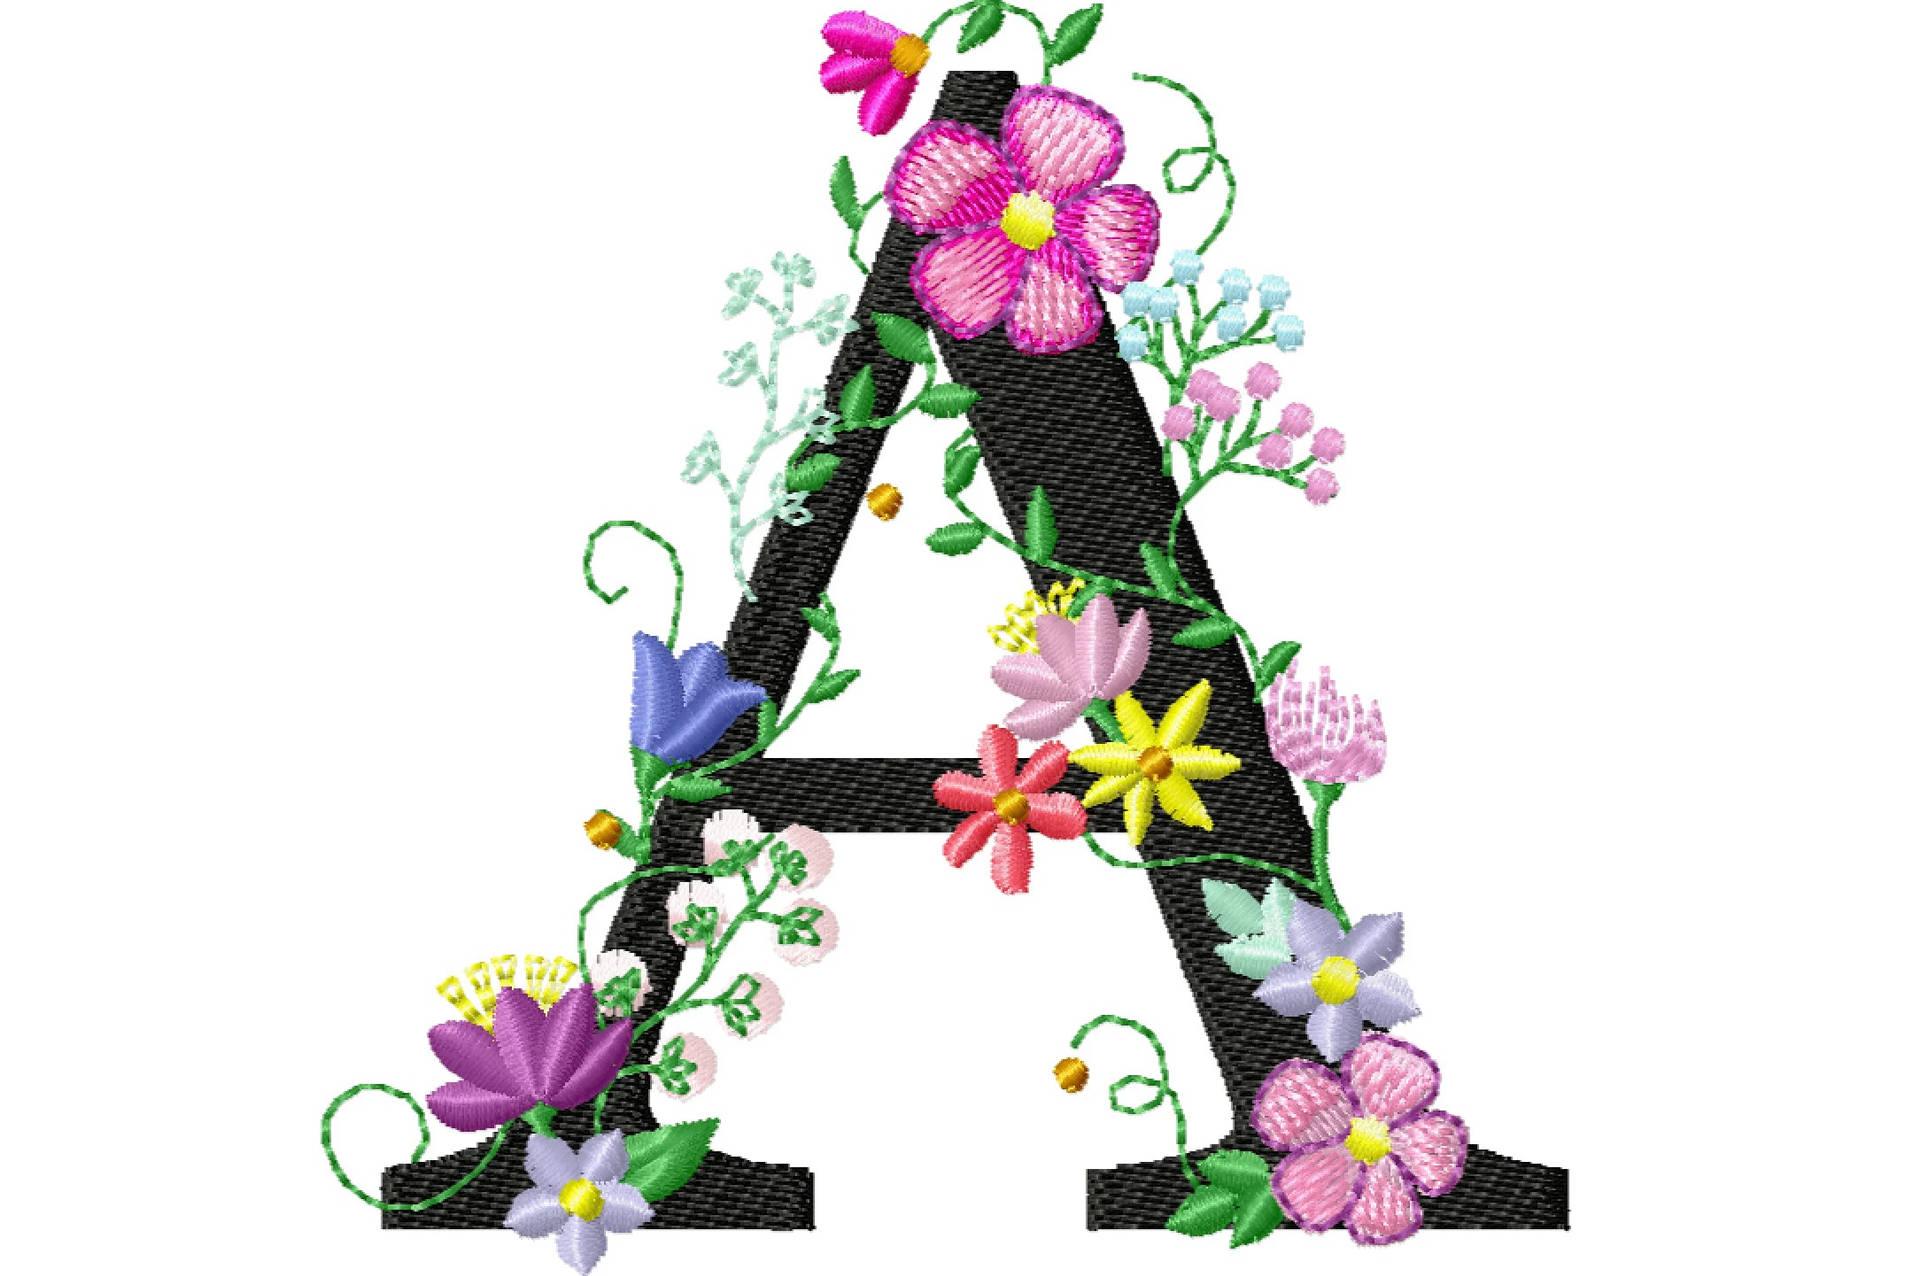 Embroidered Alphabet Letter A With Colorful Flowers